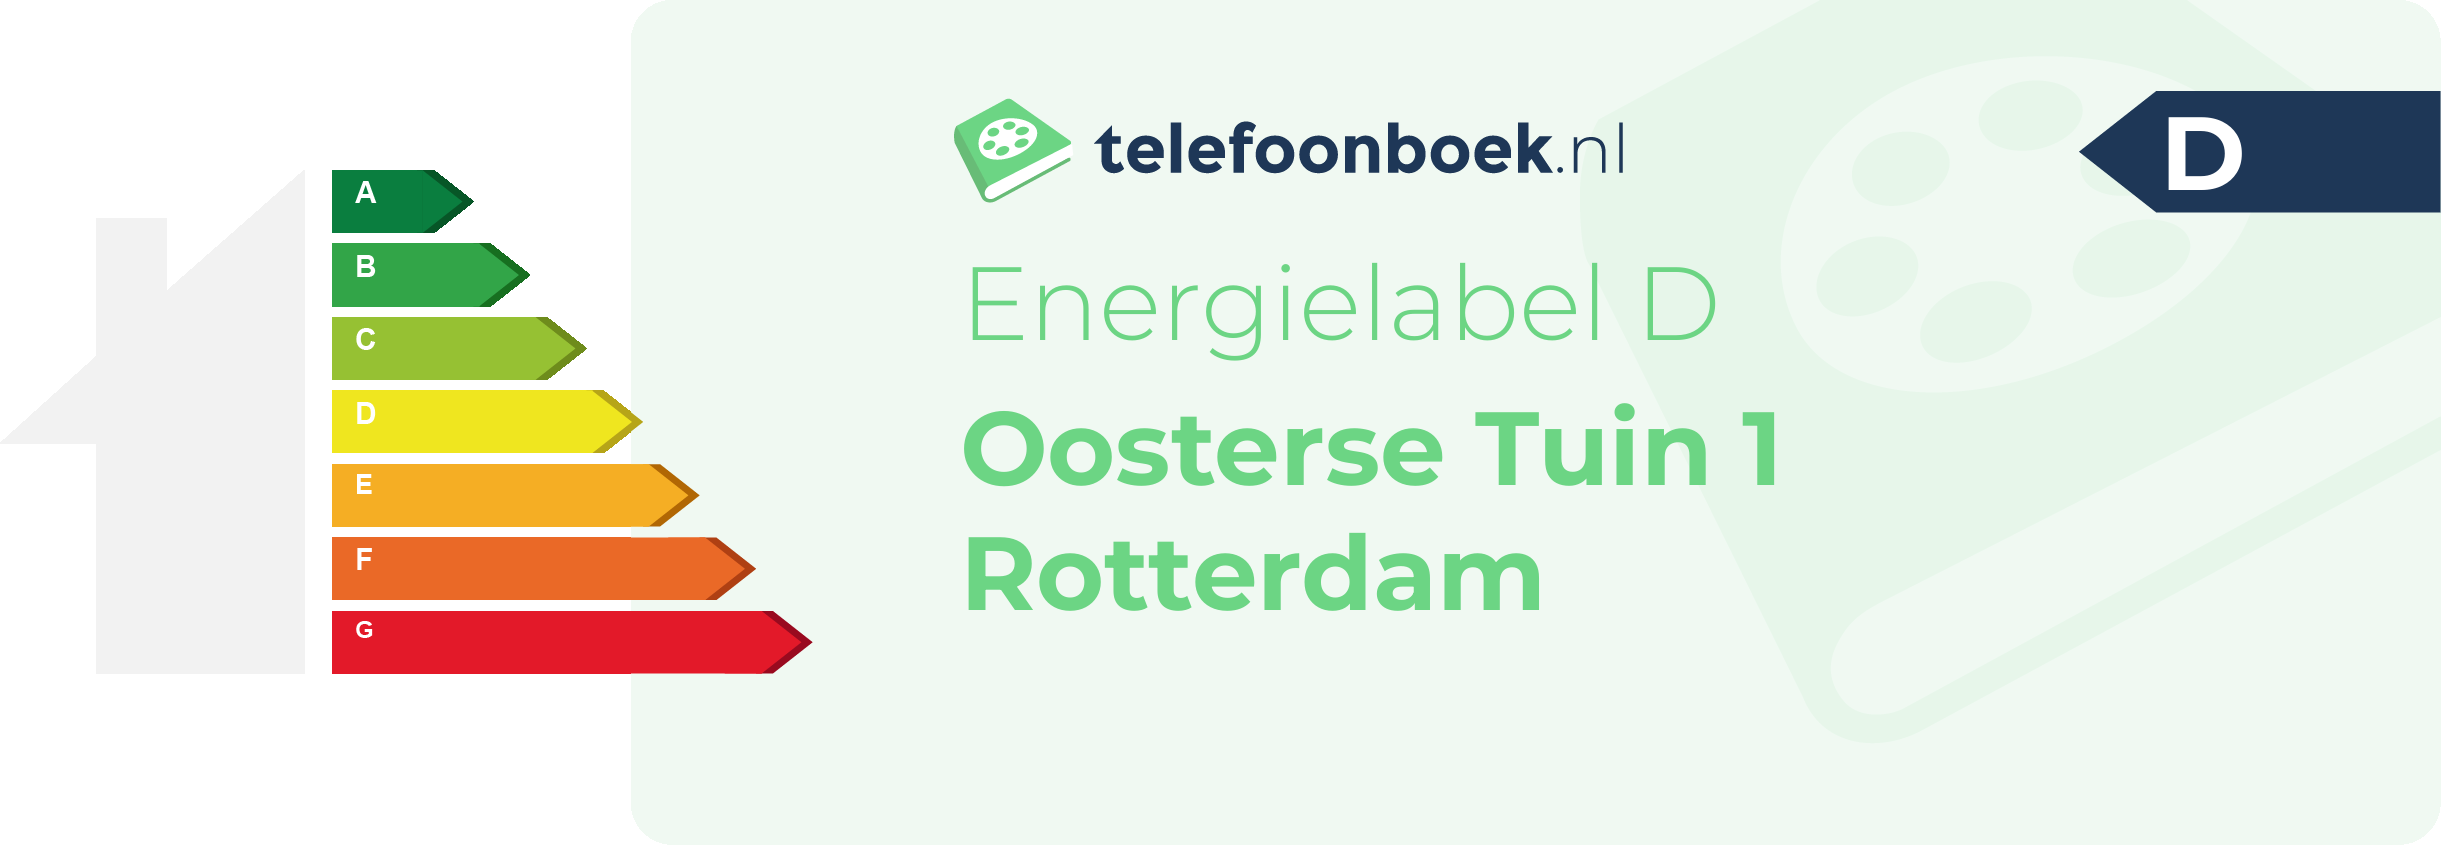 Energielabel Oosterse Tuin 1 Rotterdam